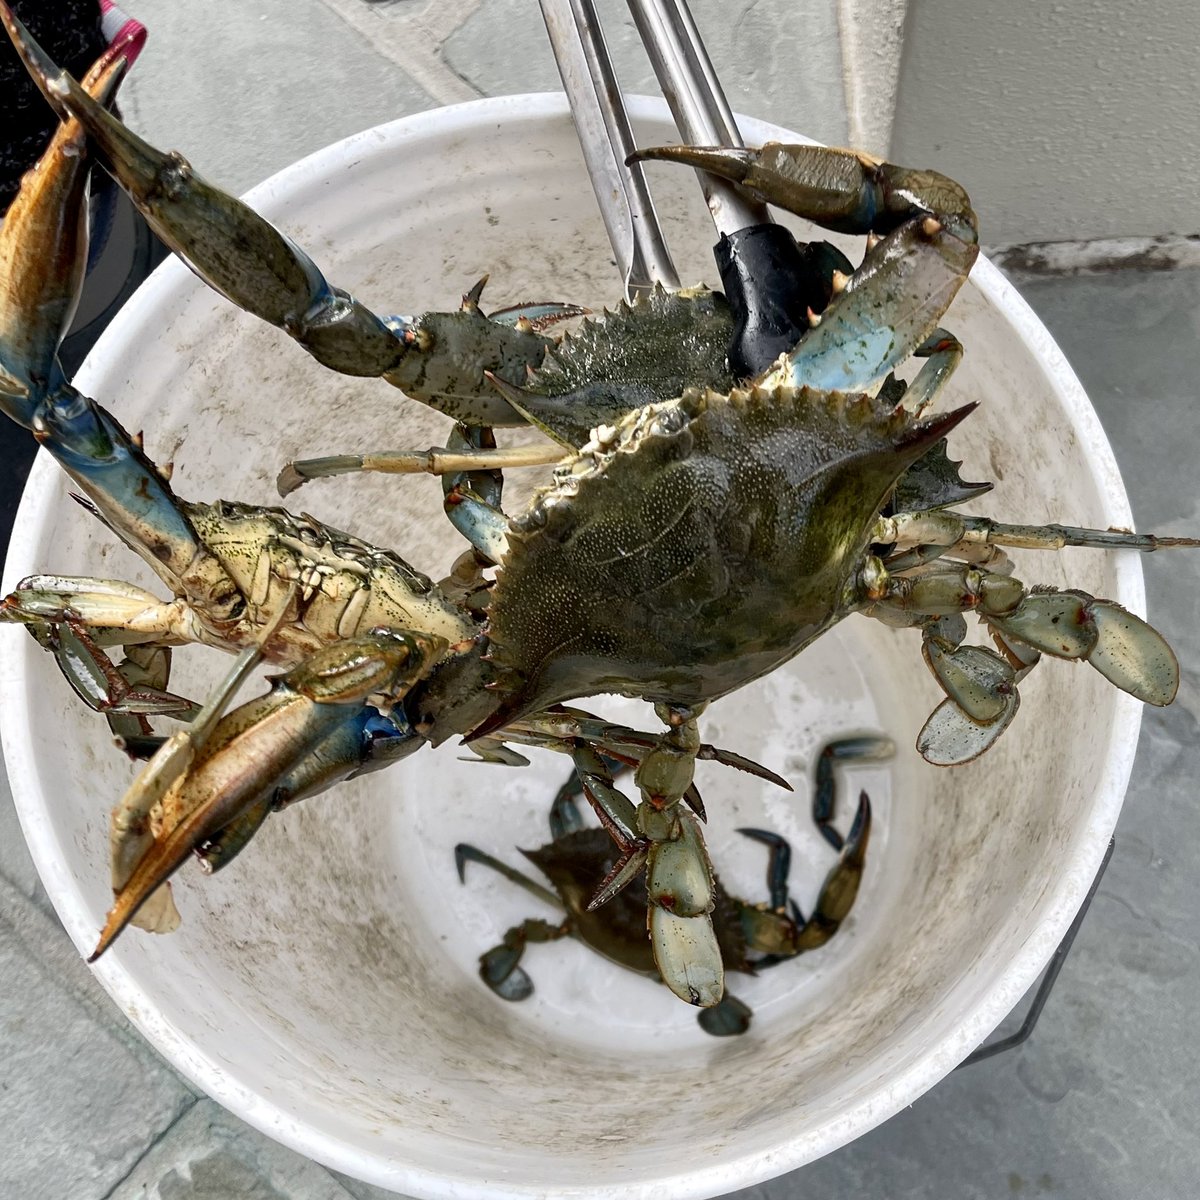 These guys were feeling crabby to start the week…Monday blues!! #bluecrab #crabtrap #reelpirate #mondayblues #whereverthewatersreach #blues